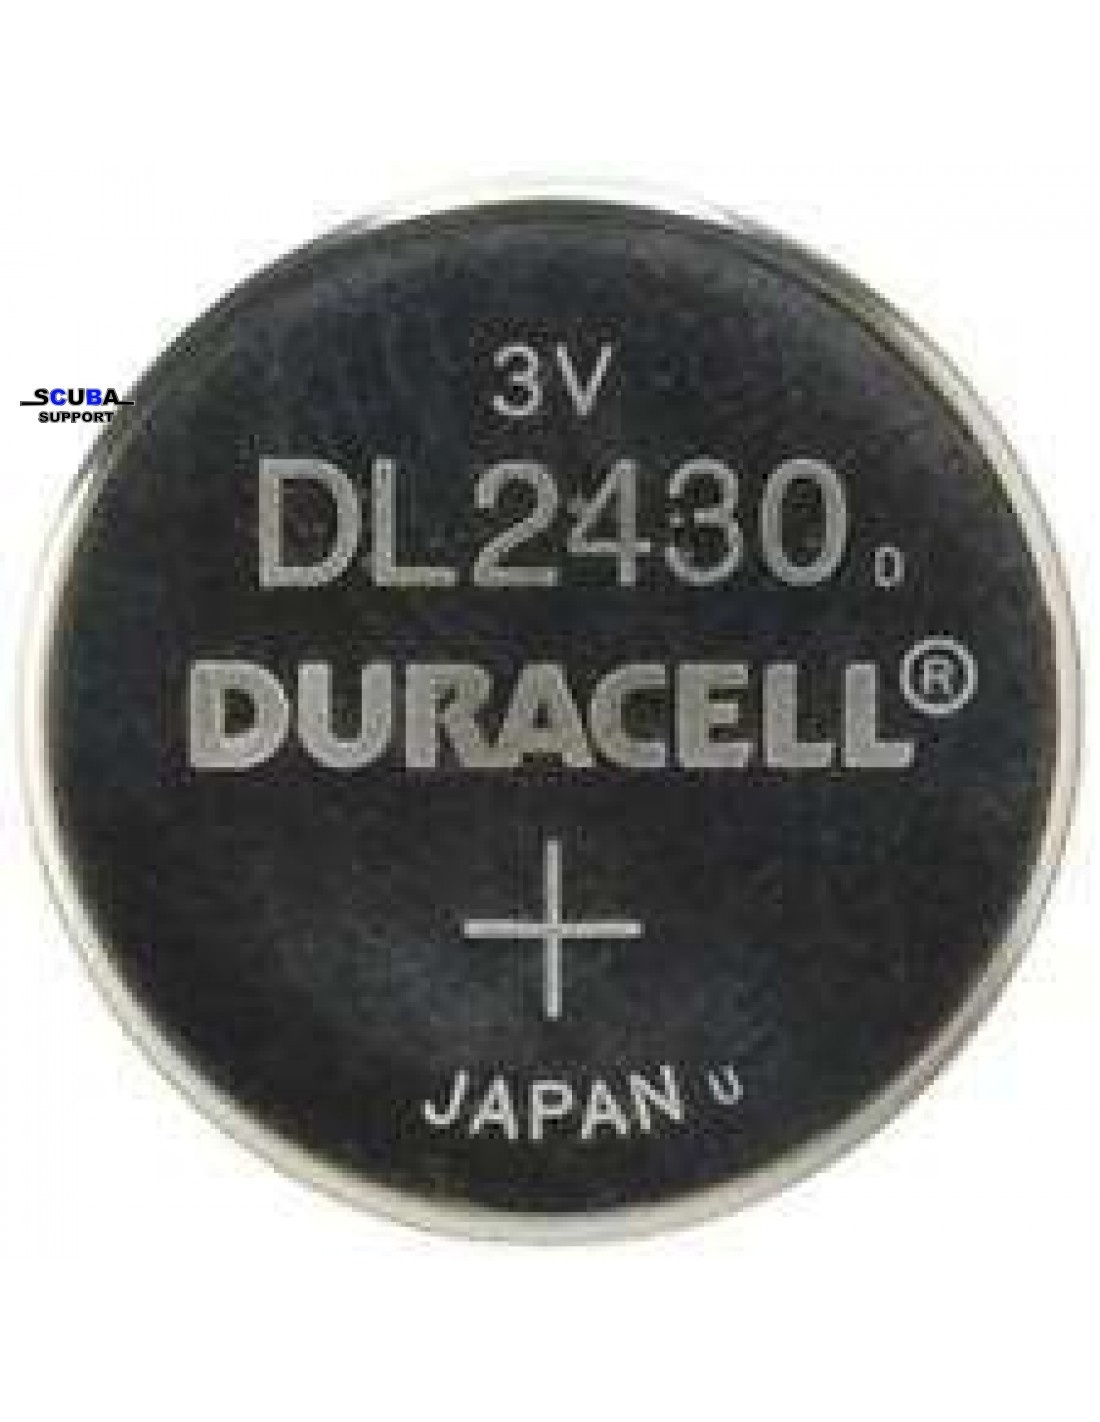 Battery CR2430 for dive computer Duracell - Scuba Support